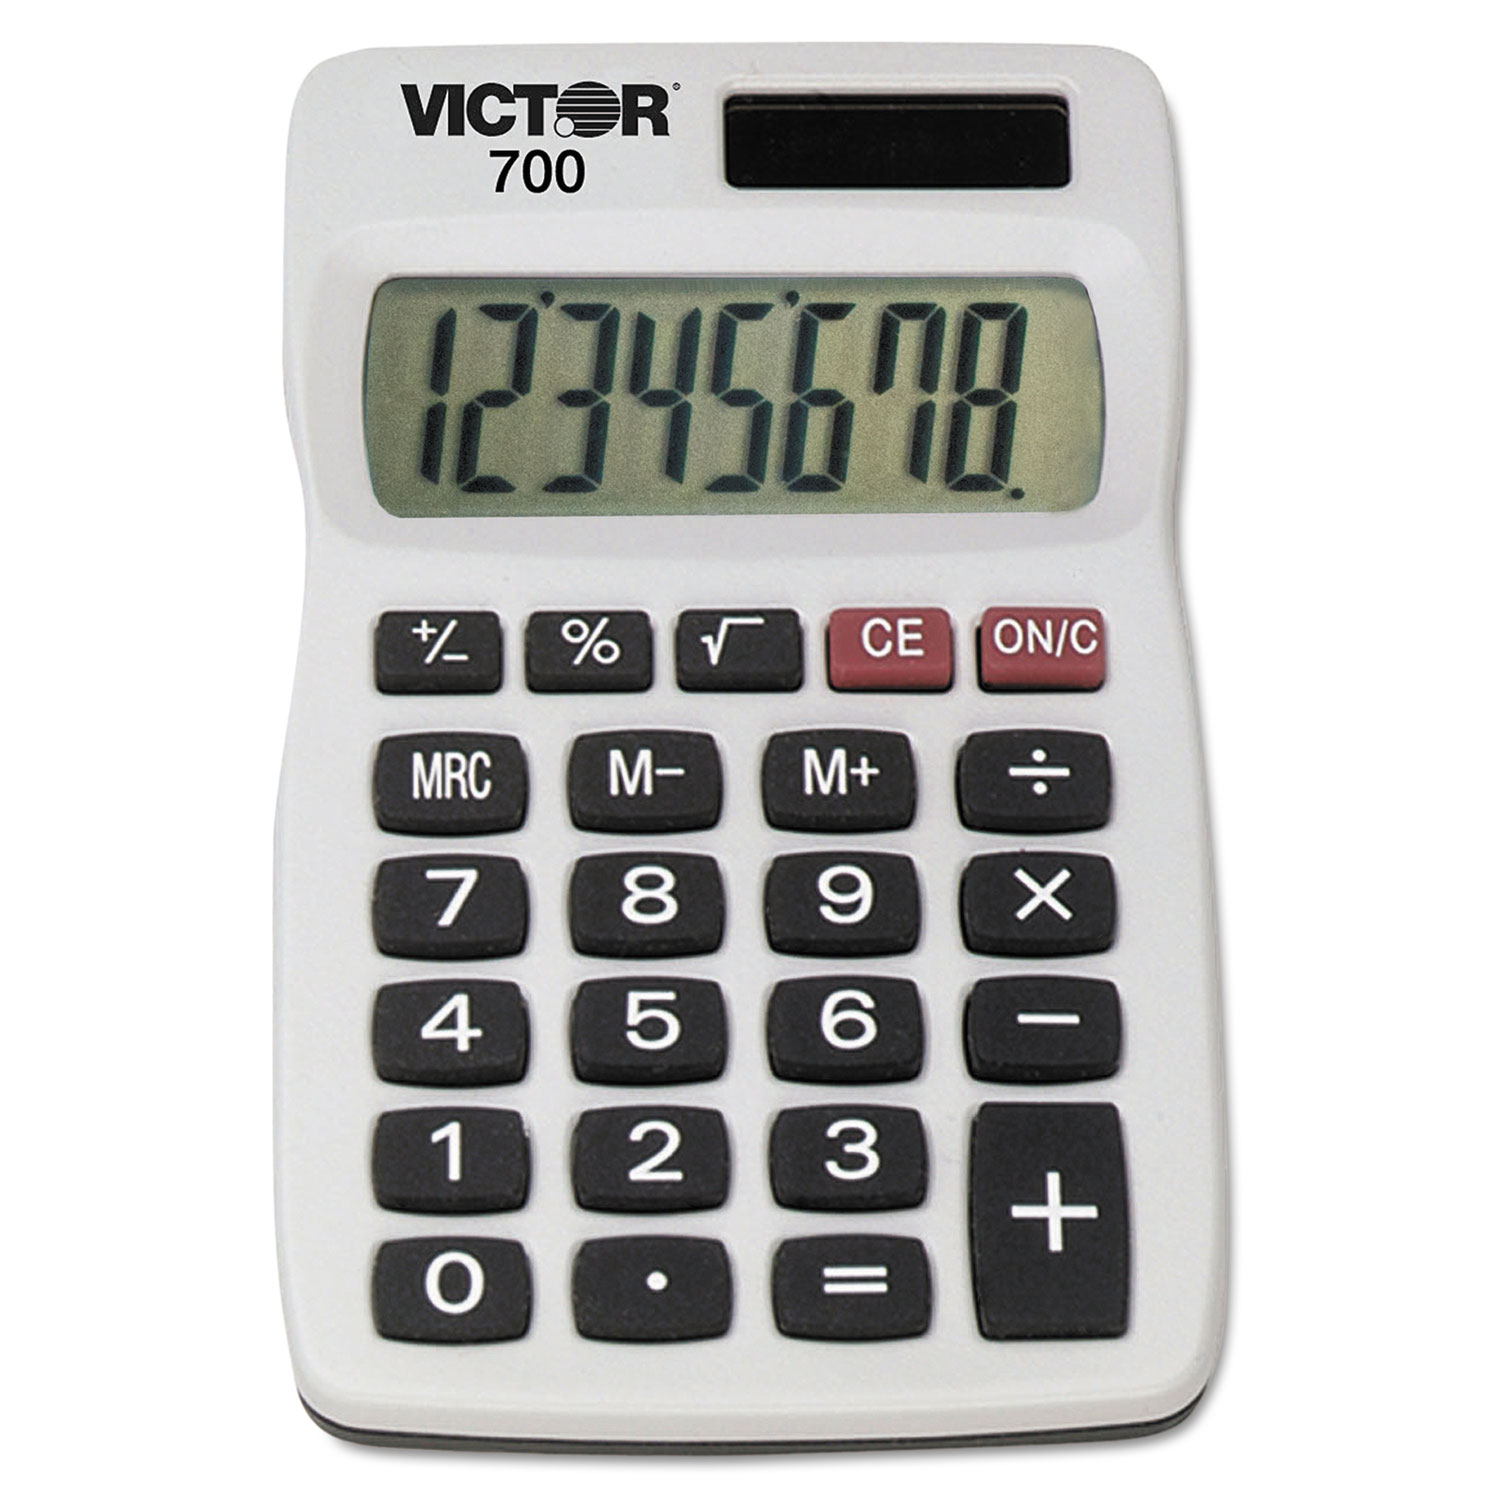  Victor 700 700 Pocket Calculator, 8-Digit LCD (VCT700) 